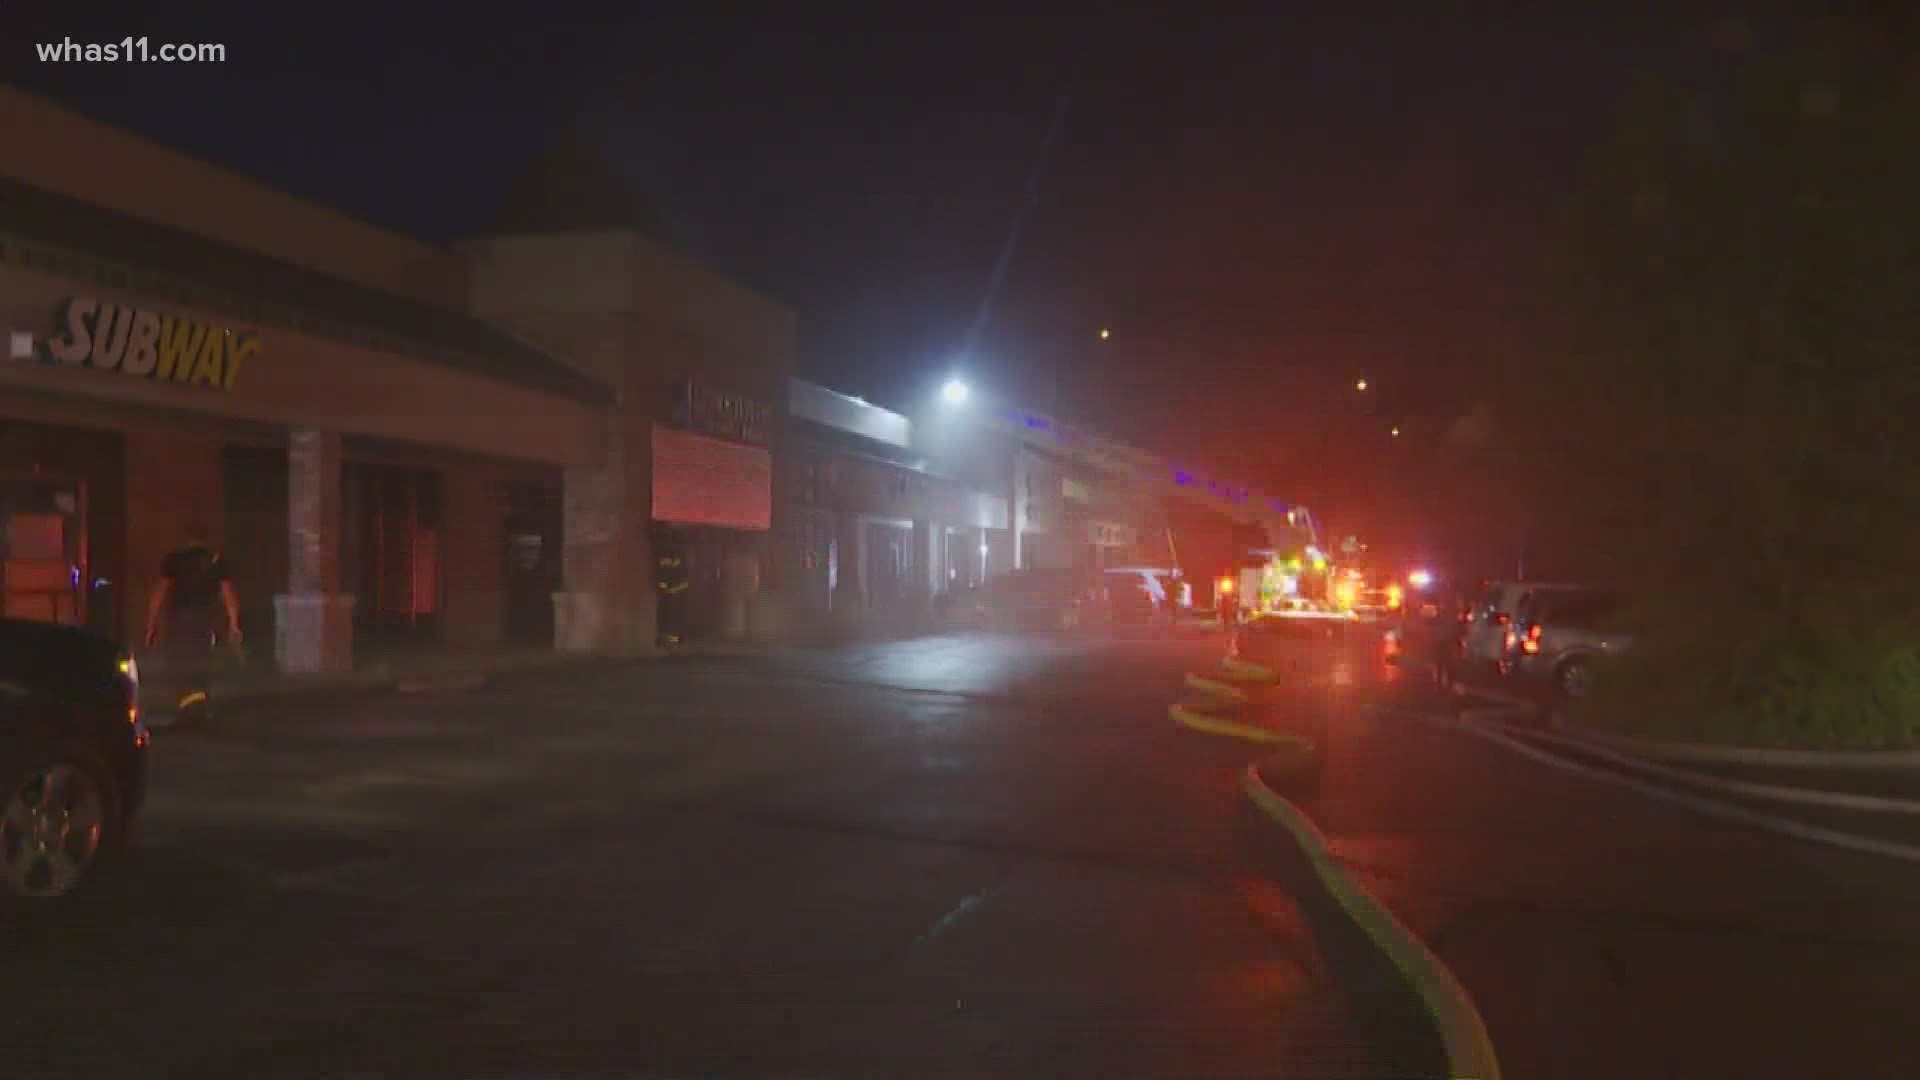 Authorities are investigating a fire at a strip mall near State Street.